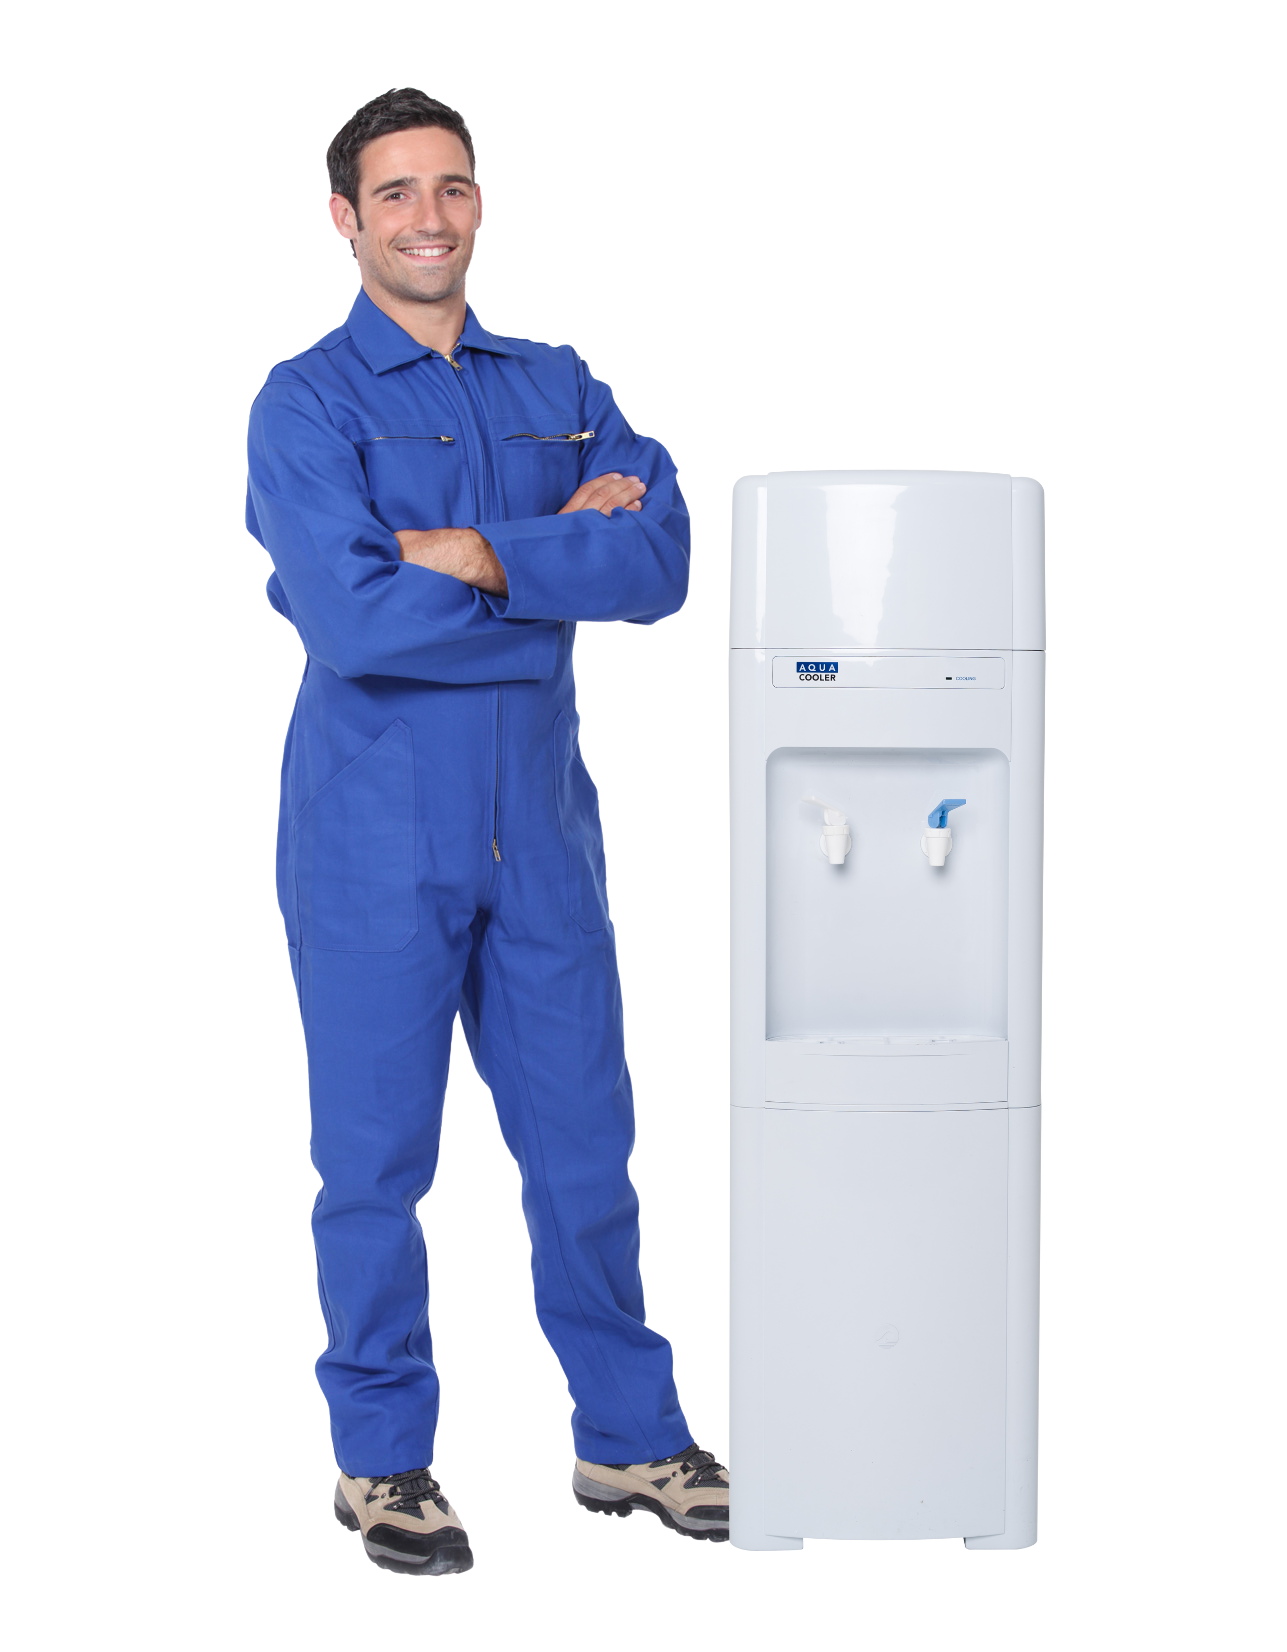 SEQ - Mains Connected Water Cooler Service – Maximus/Oasis models